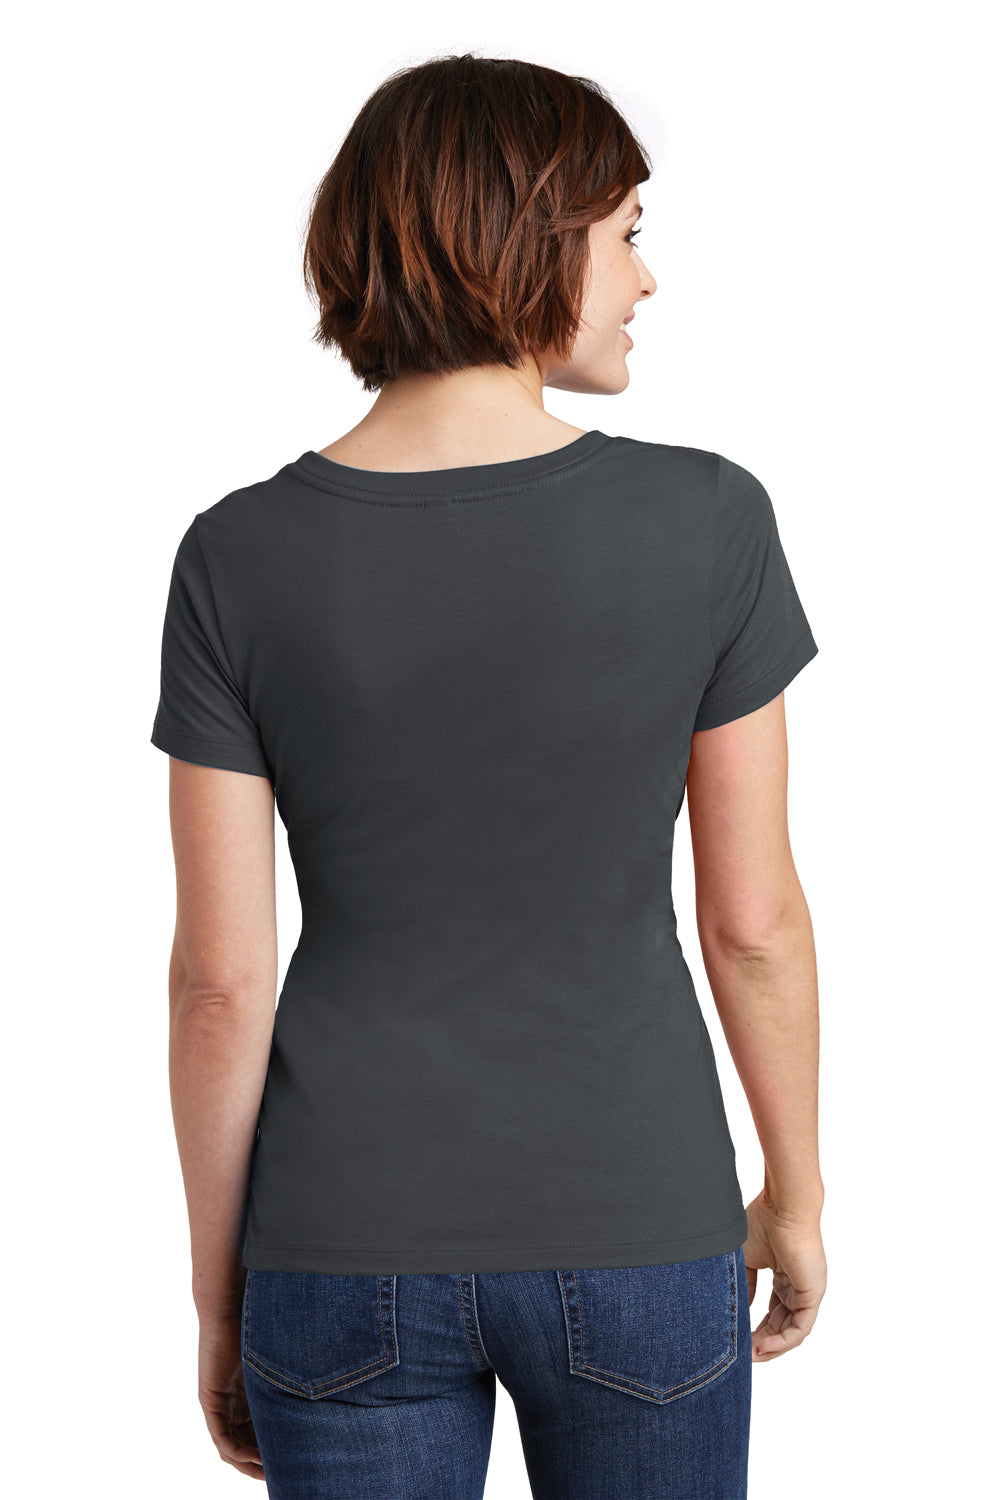 District DM106L Womens Perfect Weight Short Sleeve Scoop Neck T-Shirt Charcoal Grey Back